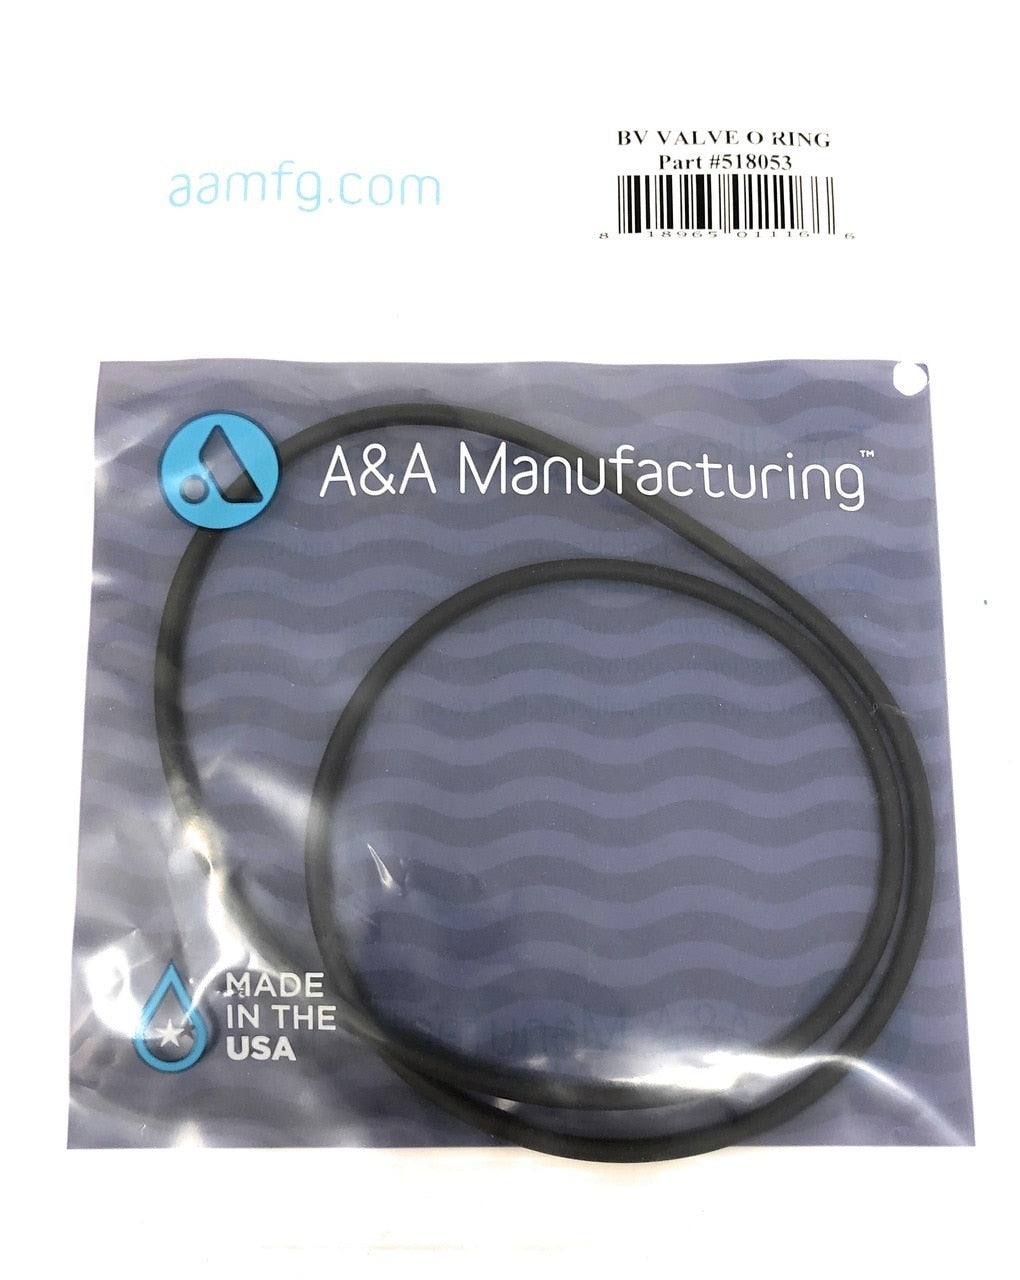 A&A Top Feed T-Valve O-Ring - OEM Packaging